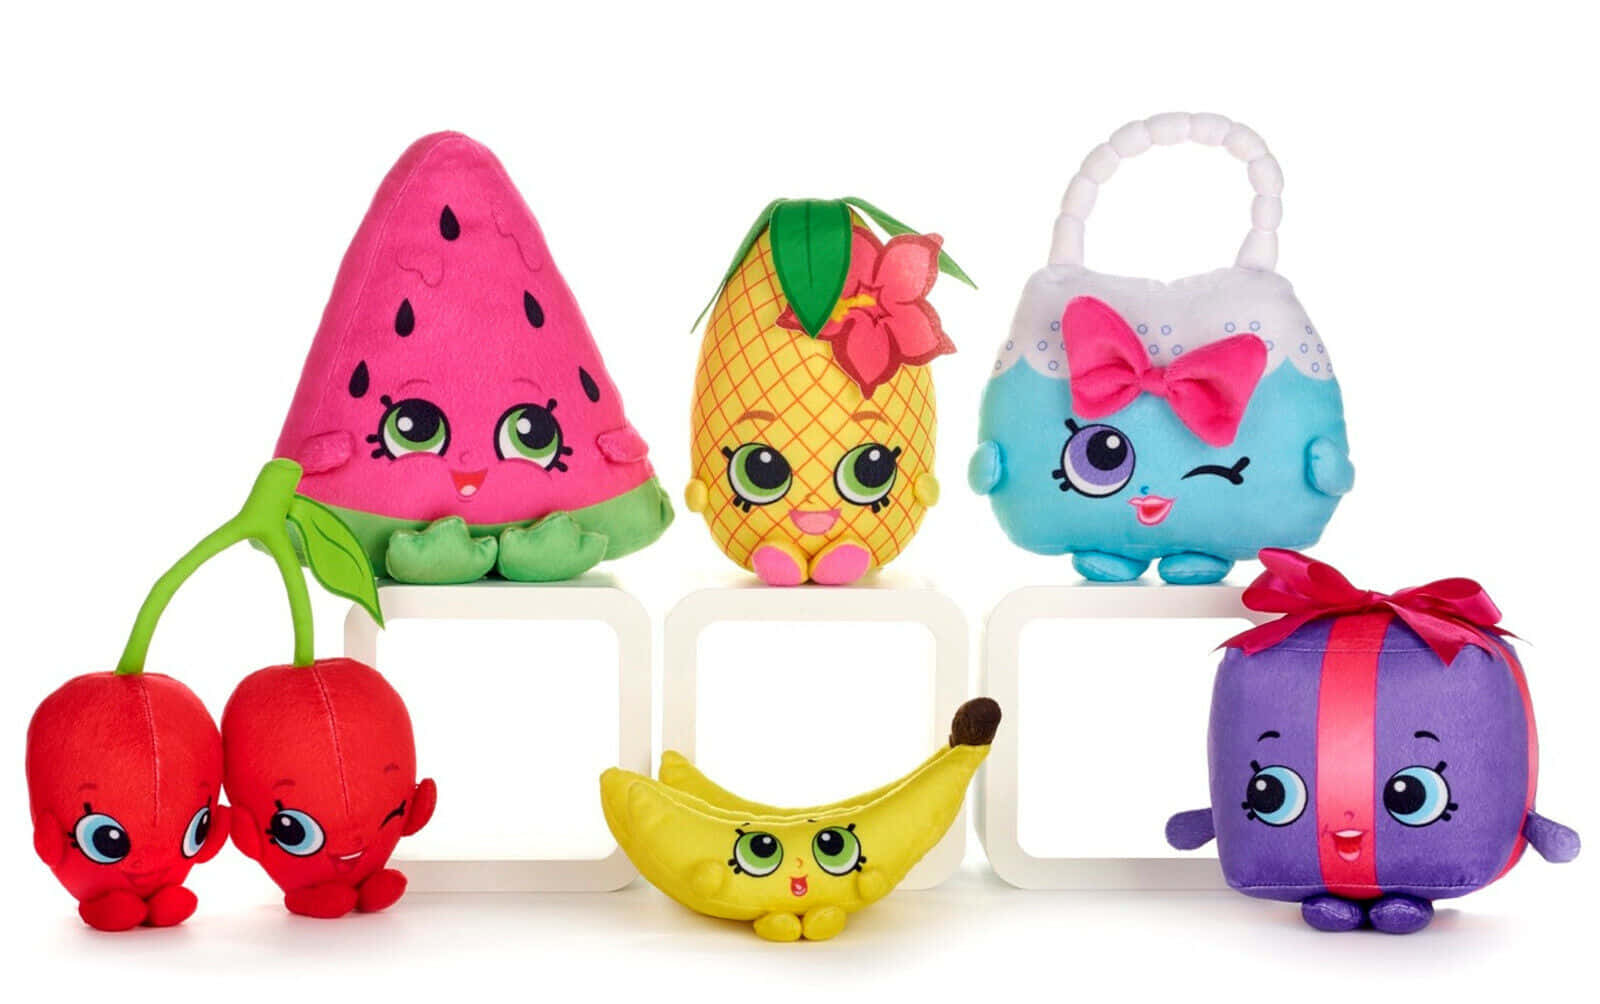 Delightful Shopkins Characters Gathered For A Fun Adventure